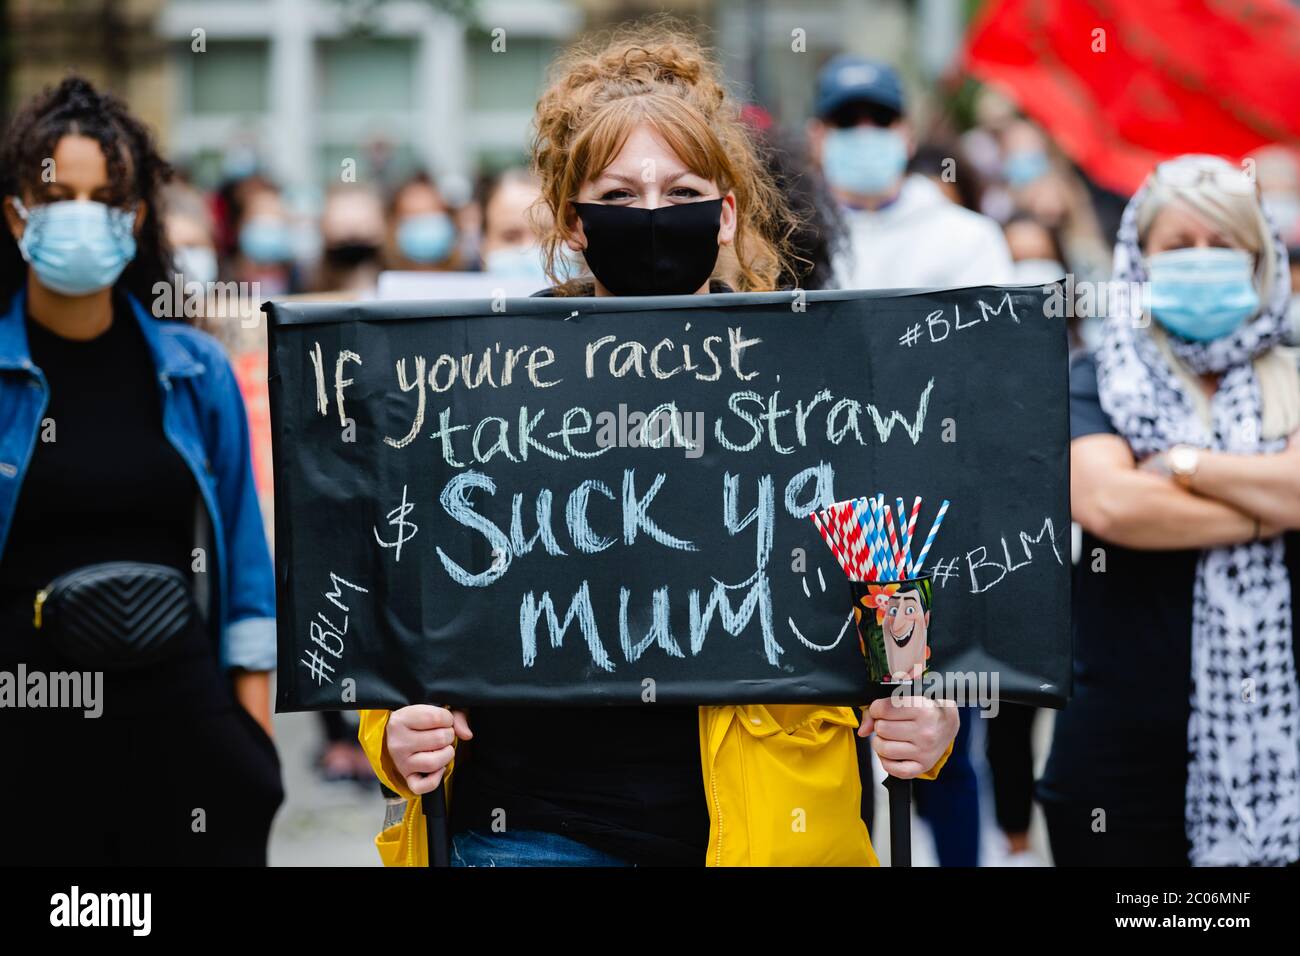 Newport, Wales, UK. 11th June, 2020. Hundreds of people joined the protest following the death of George Floyd, a 46 year old, African-American man, who died during an arrest by the Minneapolis police for allegedly using a counterfeit bill. His death has sparked huge protests across the world against racial discrimination. Credit: Tracey Paddison/Alamy Live News Stock Photo